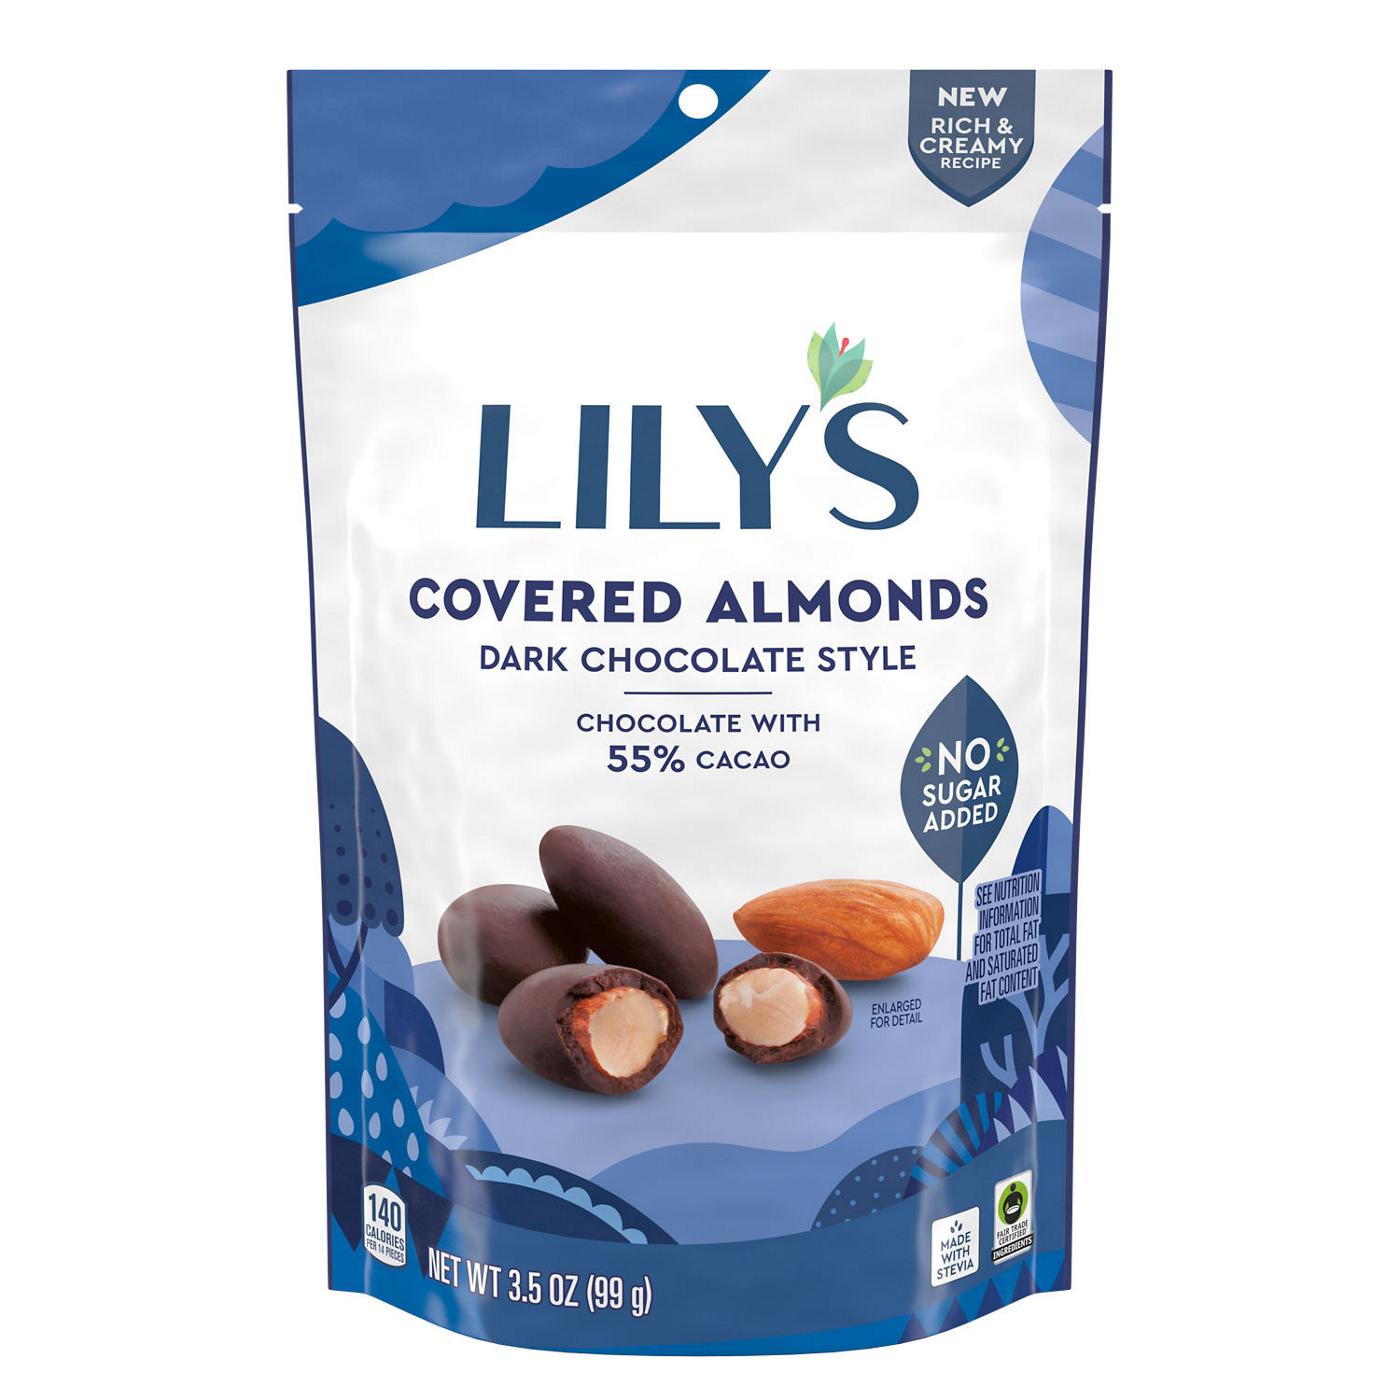 Lily's Dark Chocolate Style Covered Almonds; image 1 of 5